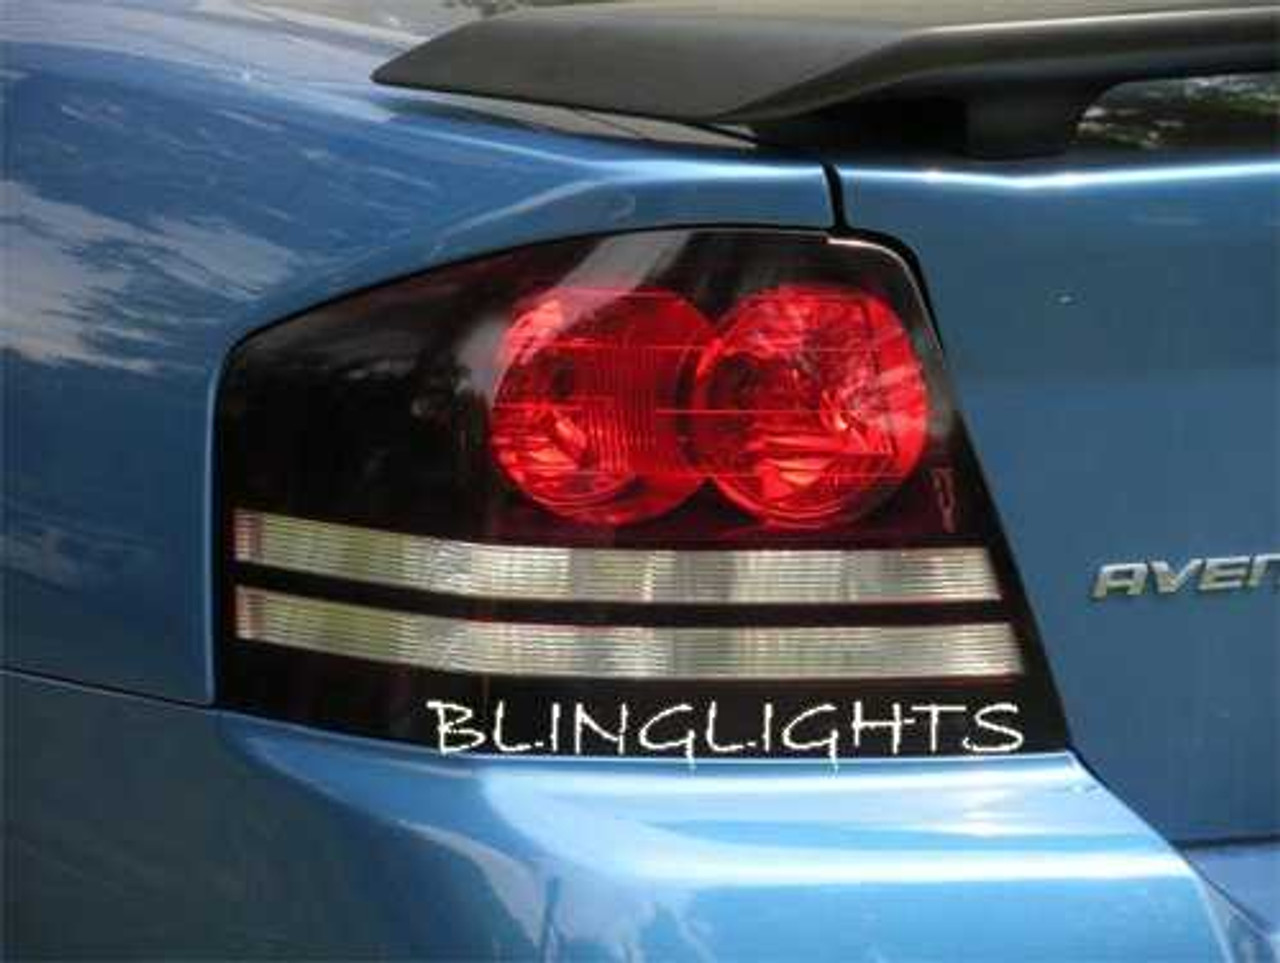 Dodge Avenger Tinted Smoked Taillamps Taillights Overlays Protection Film